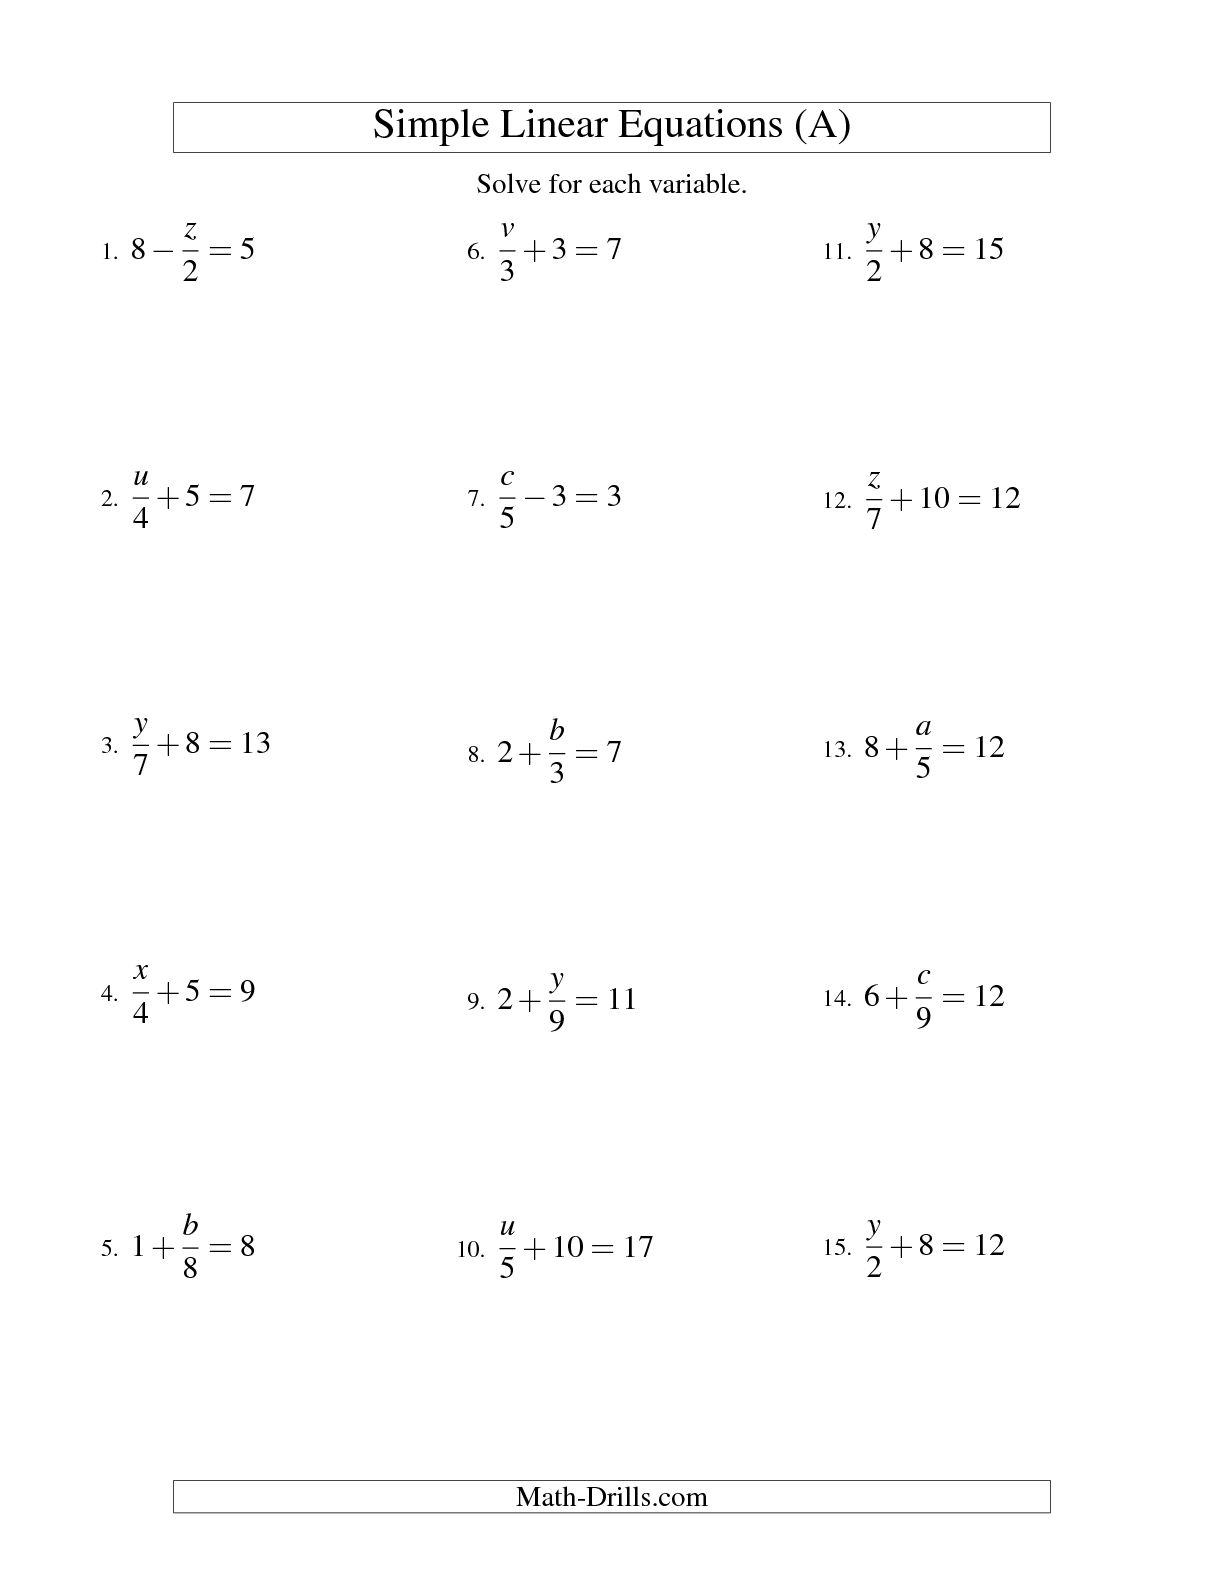 Solving Linear Equations Worksheet with Answers